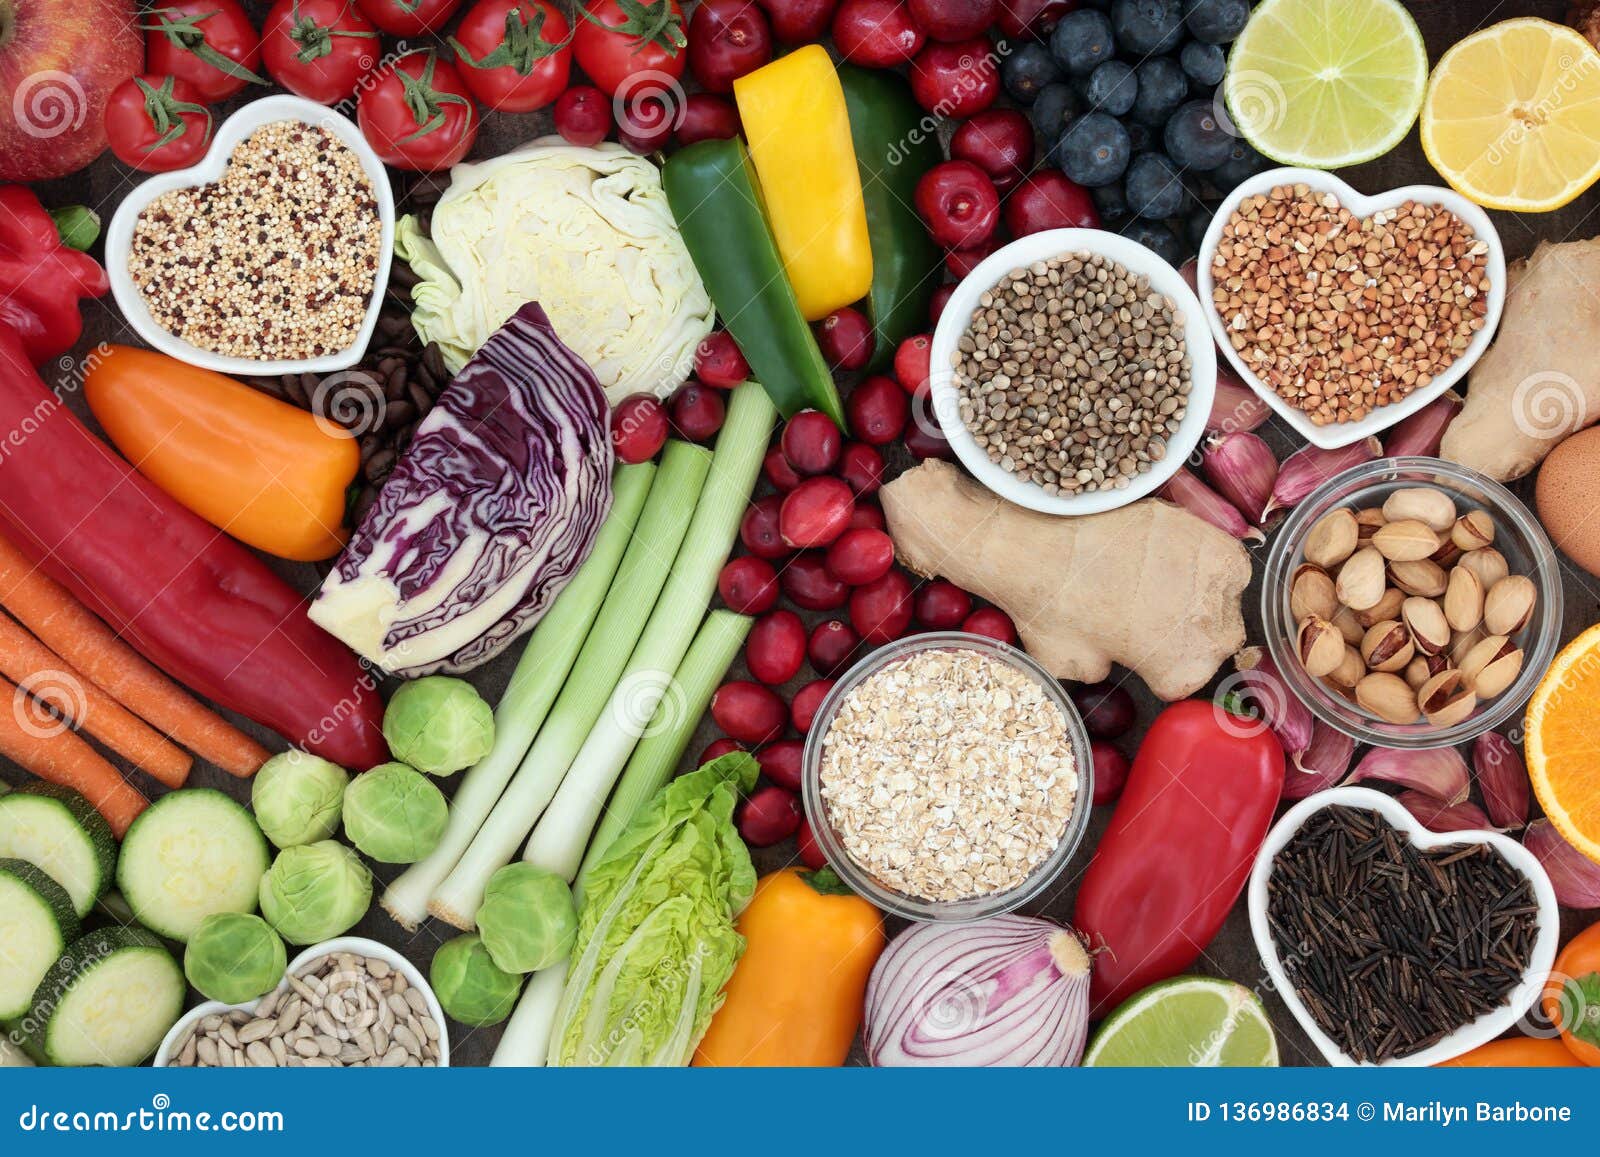 Super Food For A Healthy Diet Stock Photo Image Of Nutrition Natural